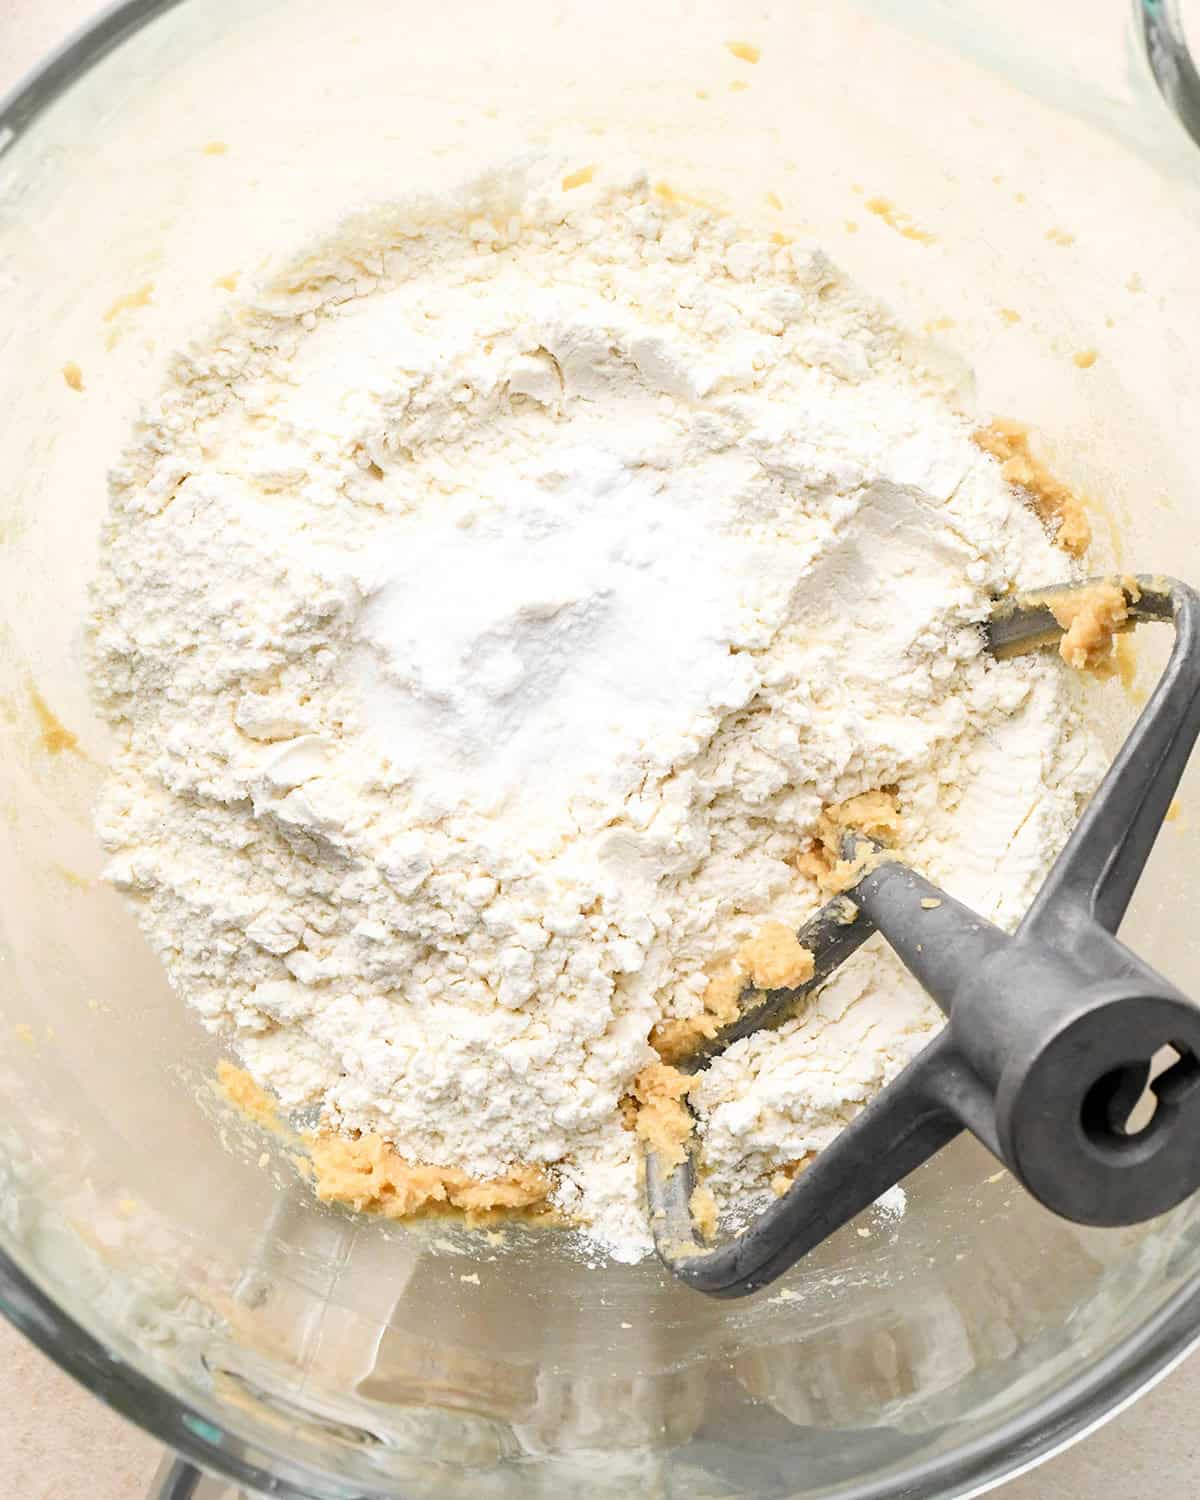 How to Make Edible Cookie Dough  - adding dry ingredients to butter mixture before beating